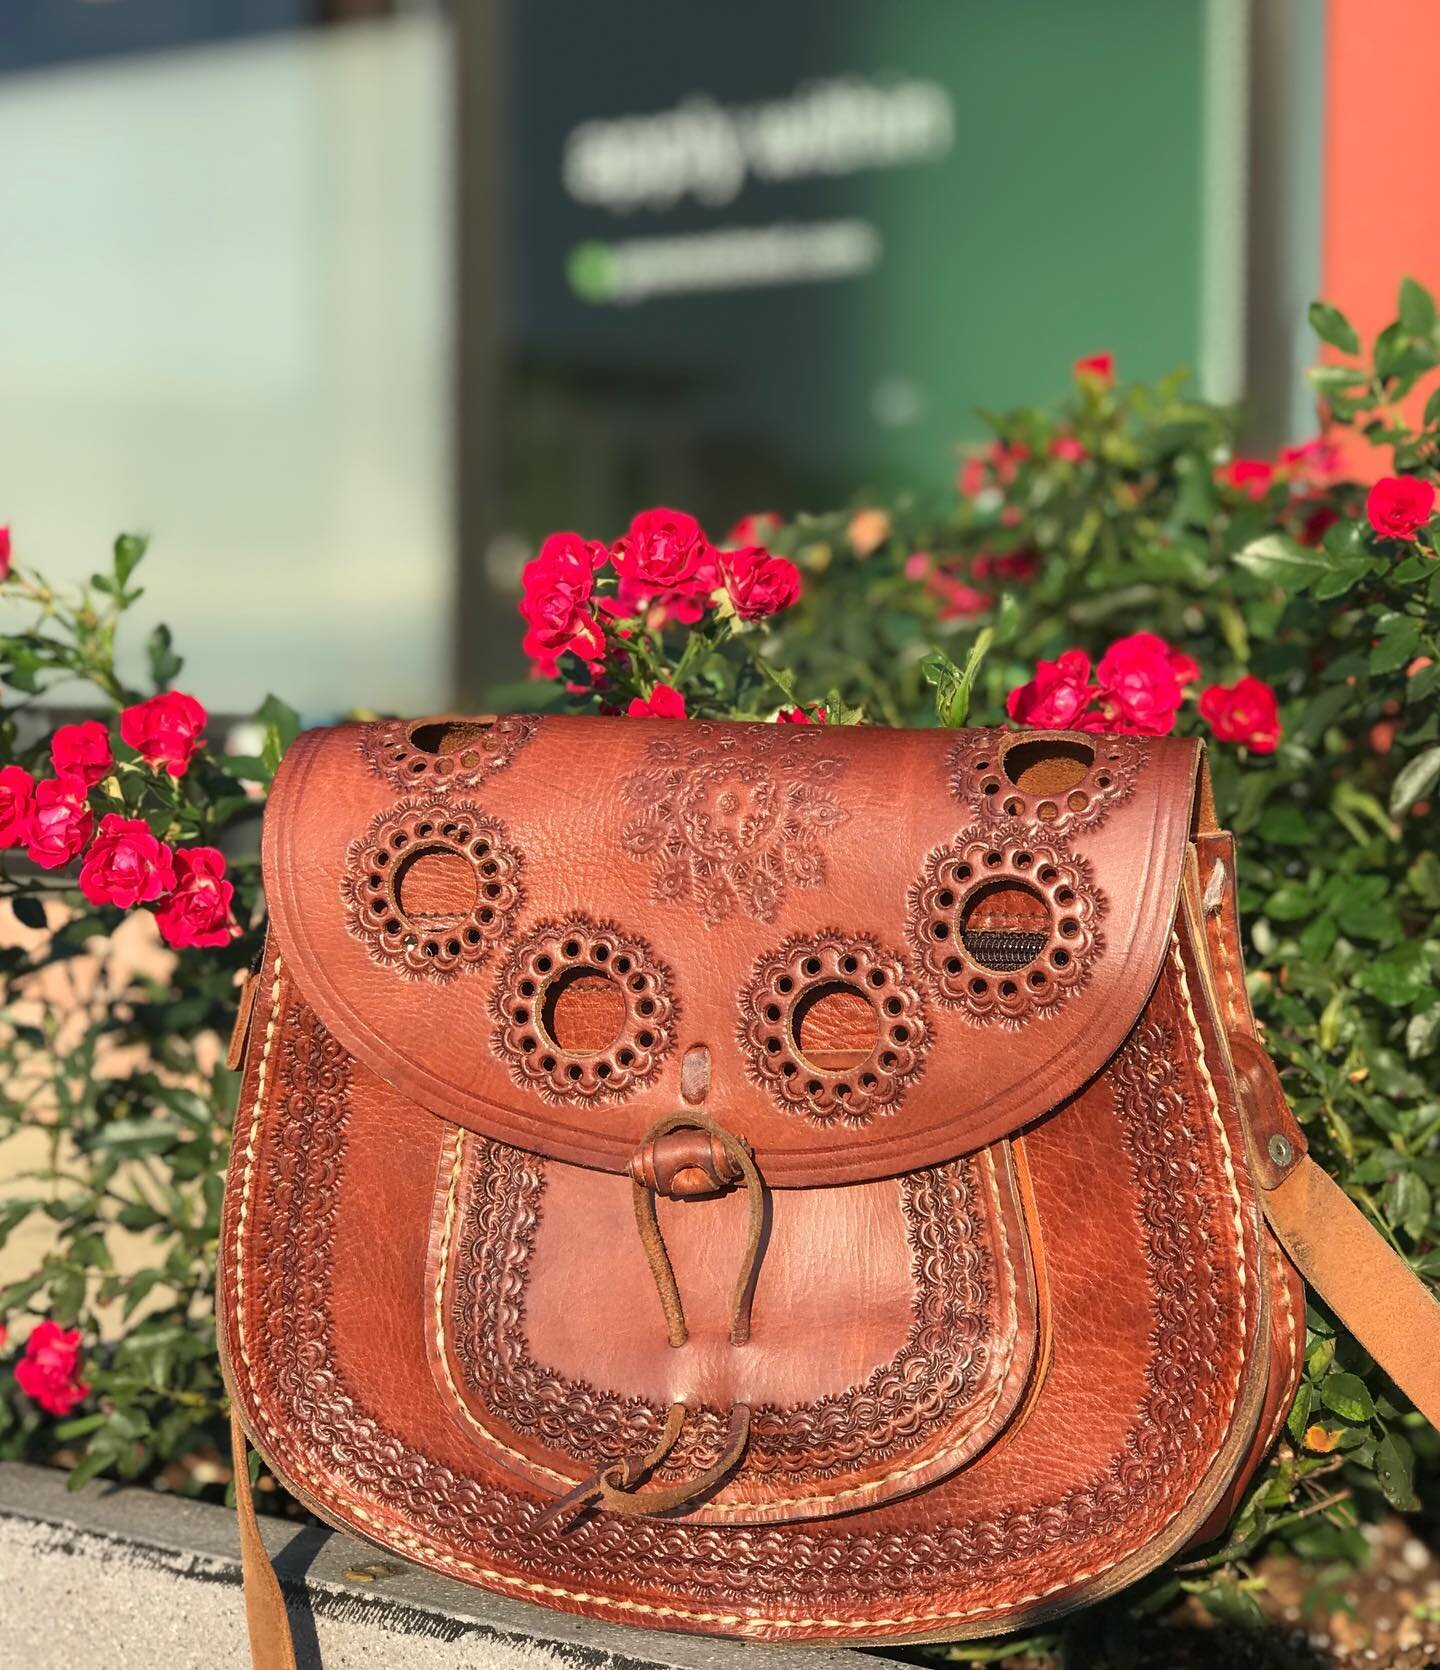 🧡🍁Beautifully detailed leather crossbody! So perfect for everyday! $58.95🍁🧡
&bull;
For inquiries, please call or email us!
☎️ 267-807-1295 
📧snyder@greenestreet.com 
&bull;
@shopgreenestreet 
@greenestreetsynder is not affiliated with the brands